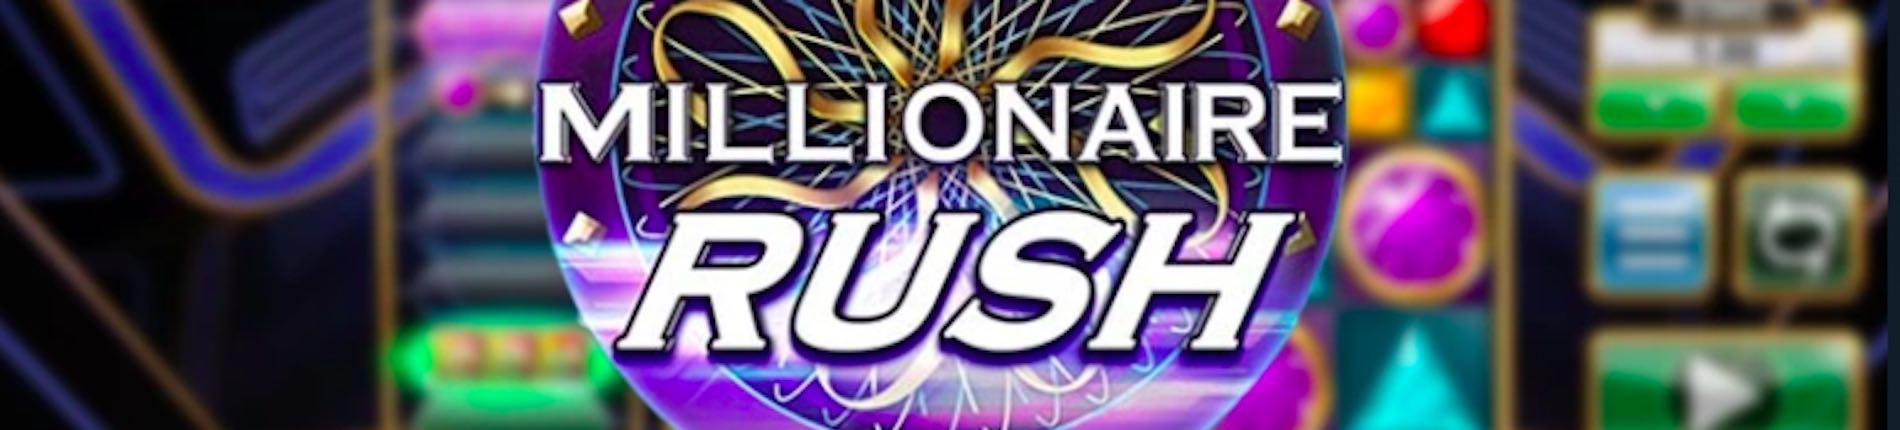 Millionaire Rush Slot from Big Time Gaming